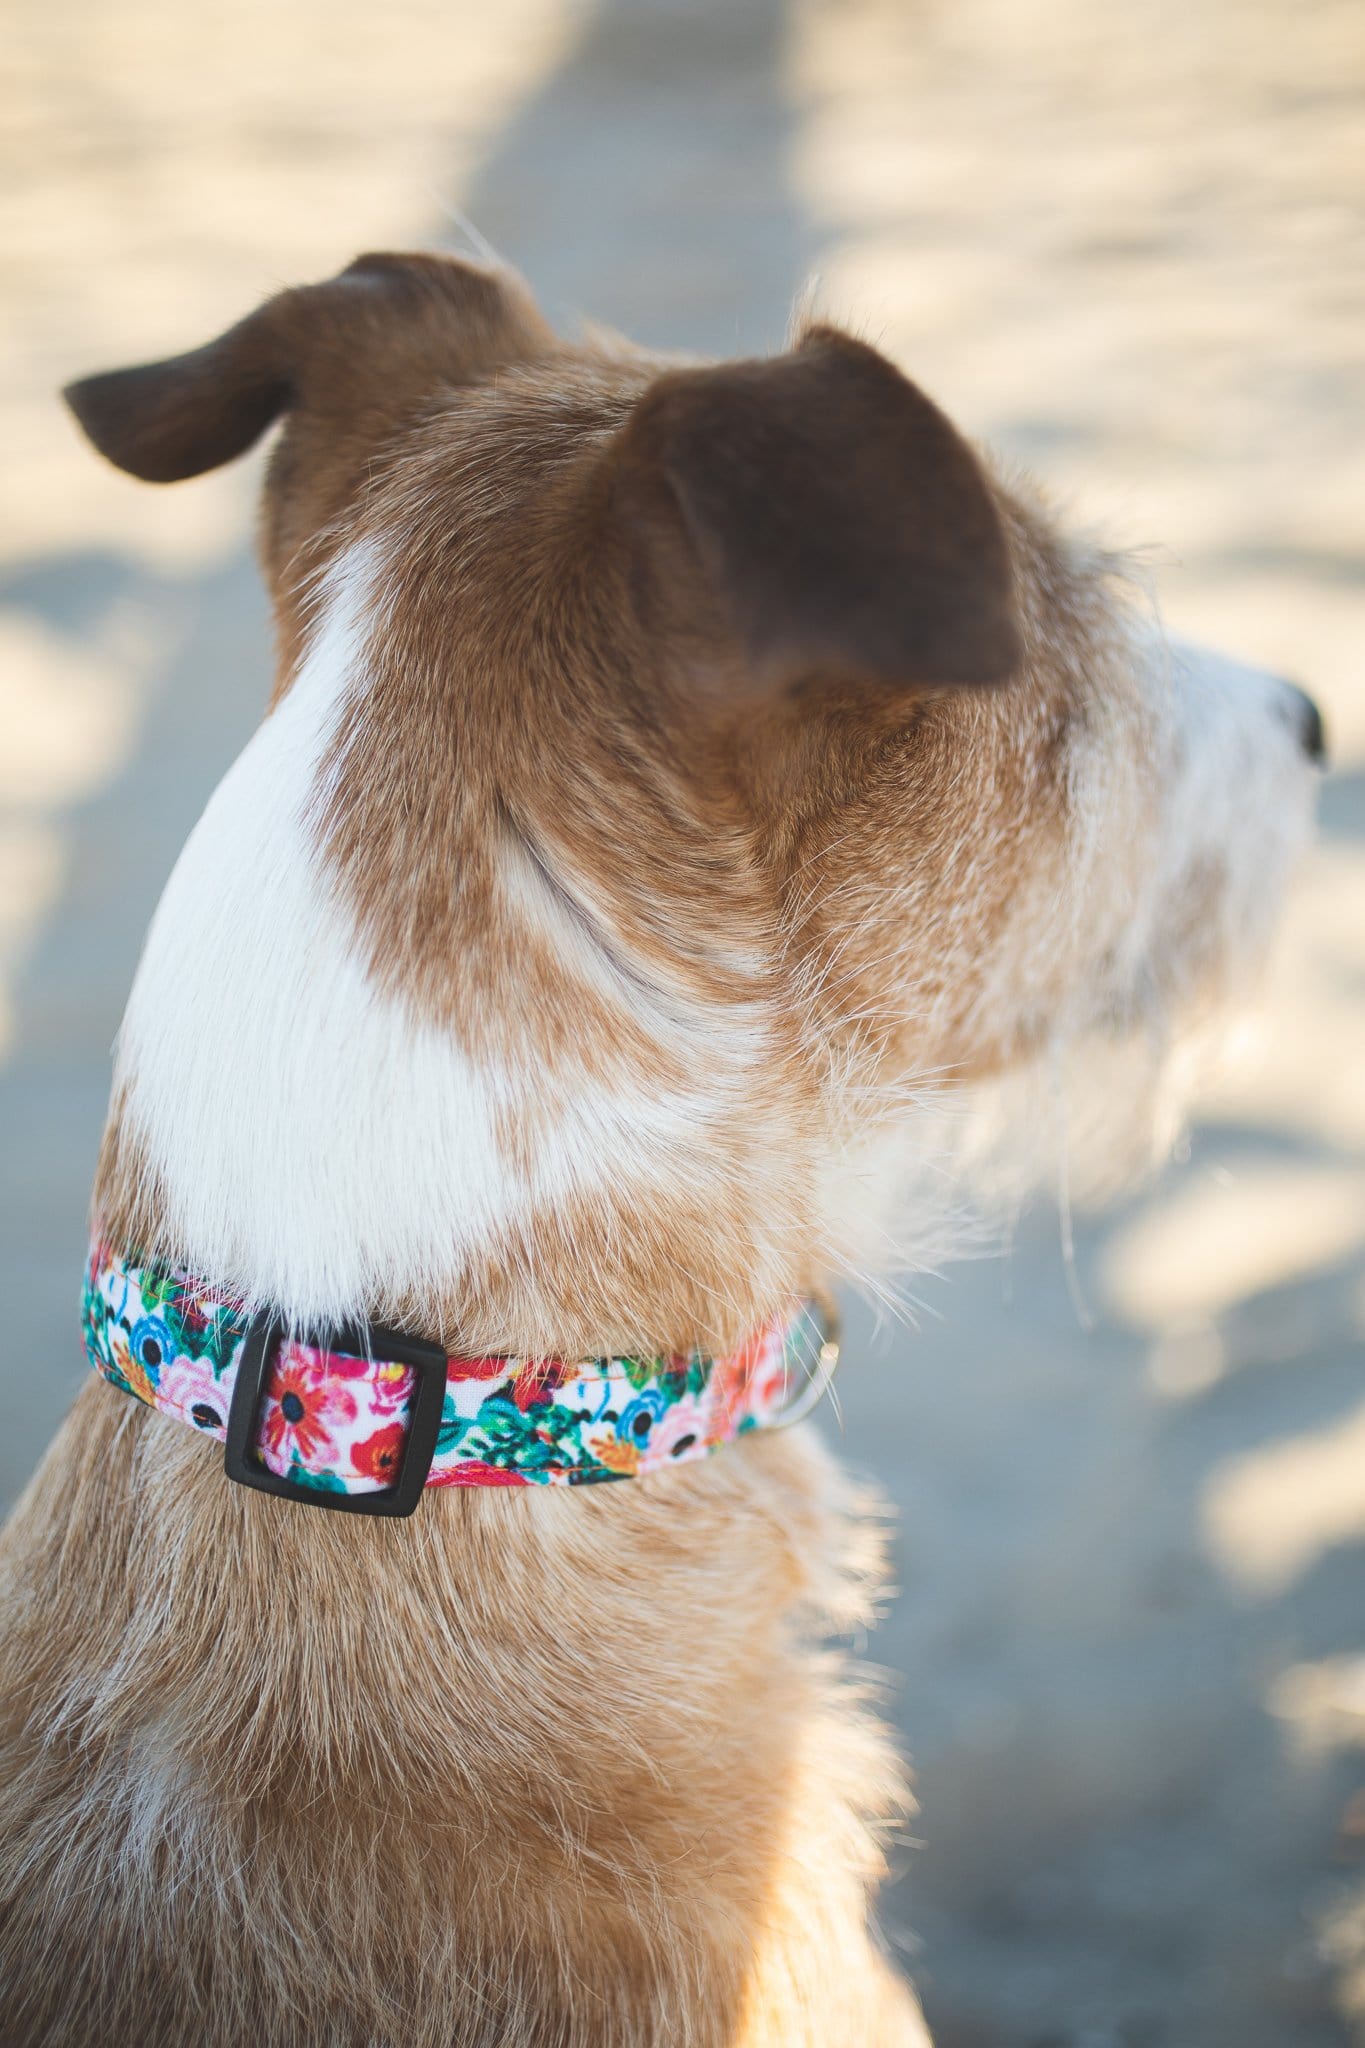 Floral Dog Collar foe samll, medium and large dogs. Quick release, durable and strong collar